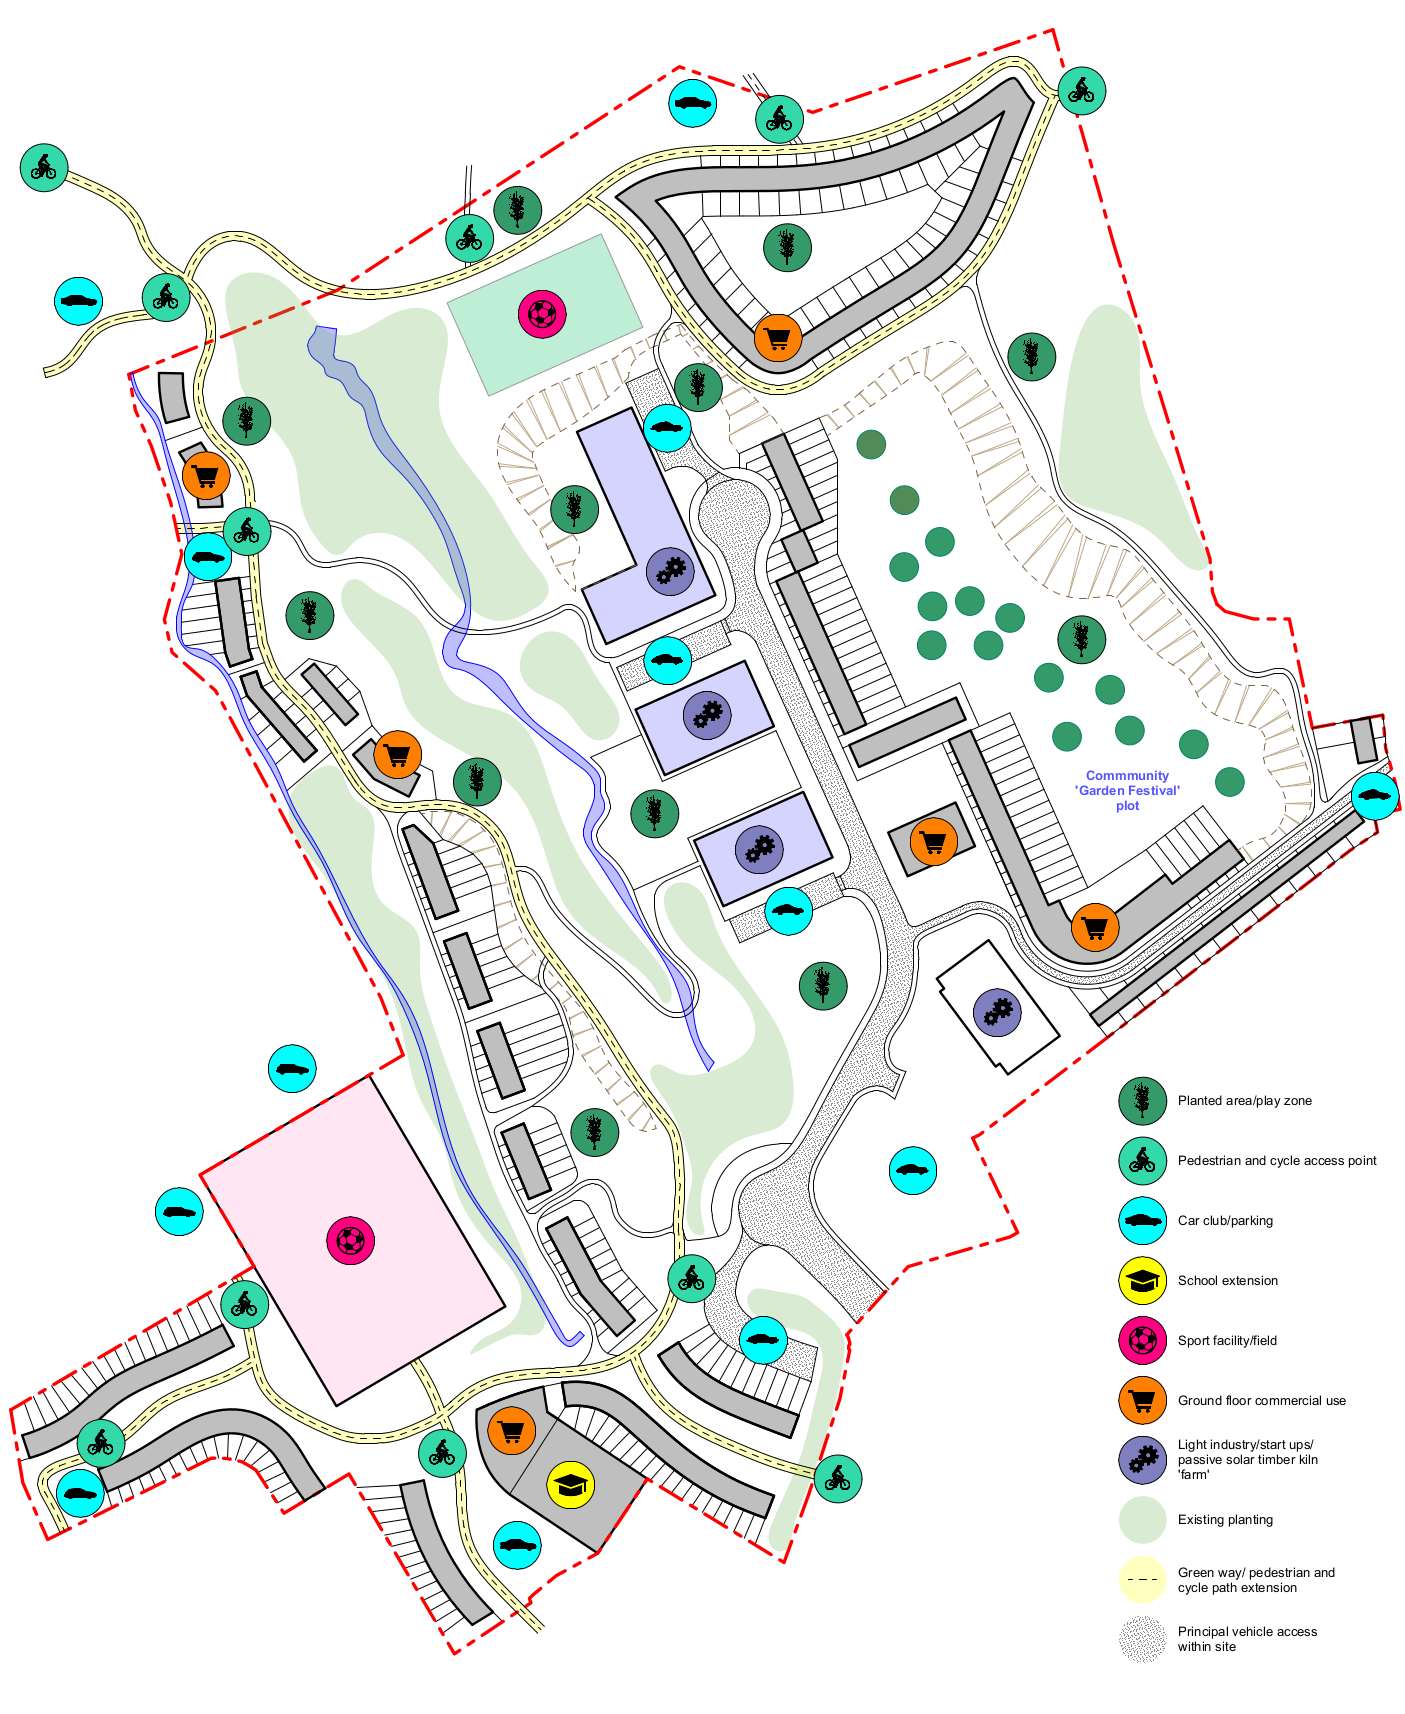 Site overview